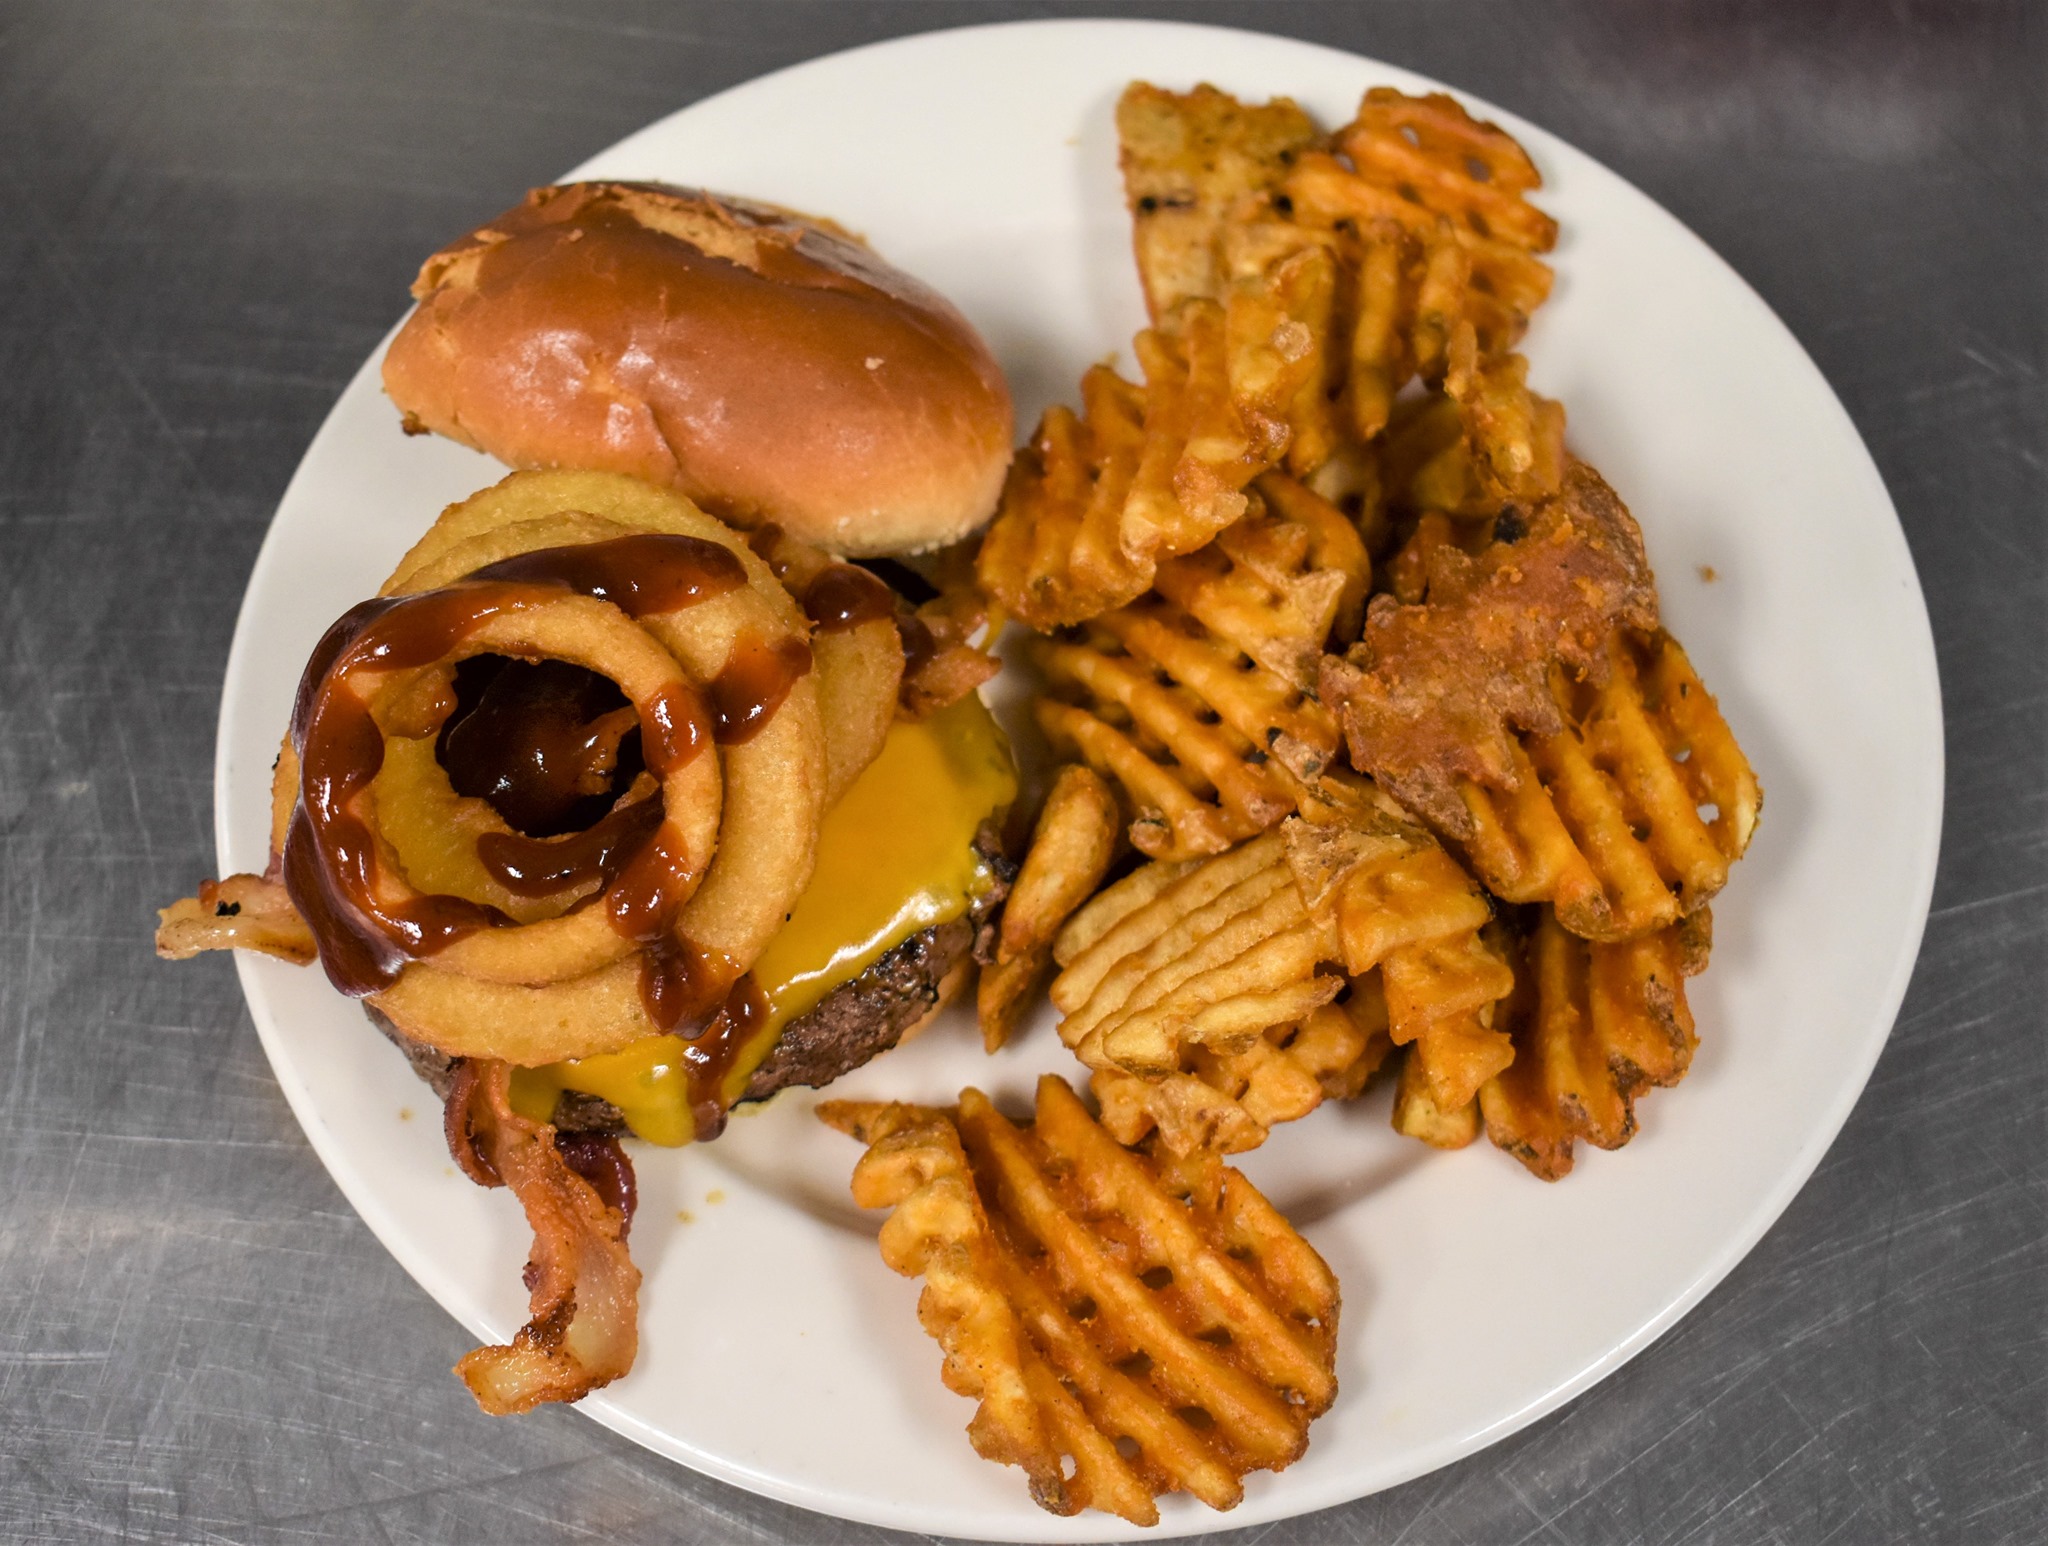 A burger with onion rings and BBQ sauce sits on a white plate with waffle fries. Photo from Aspen Tap House Facebook page.